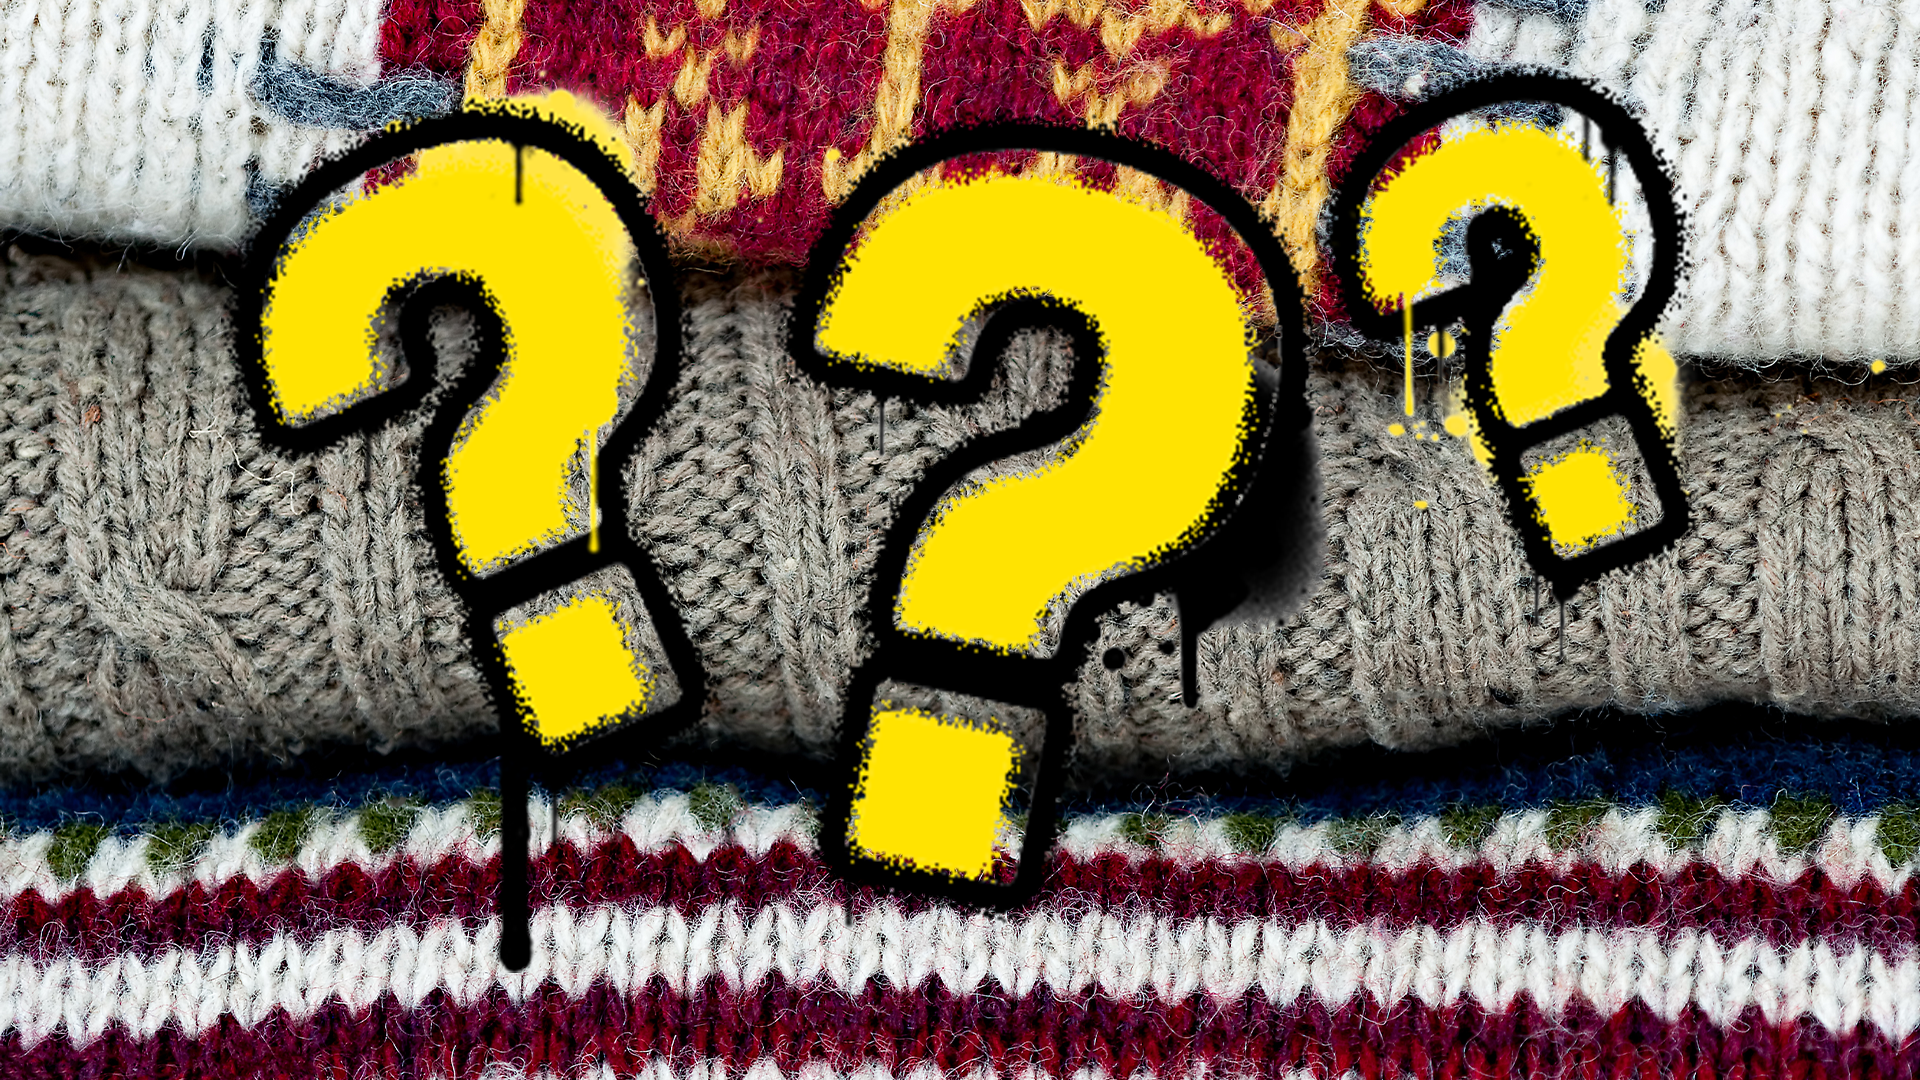 Wooly clothes and question marks